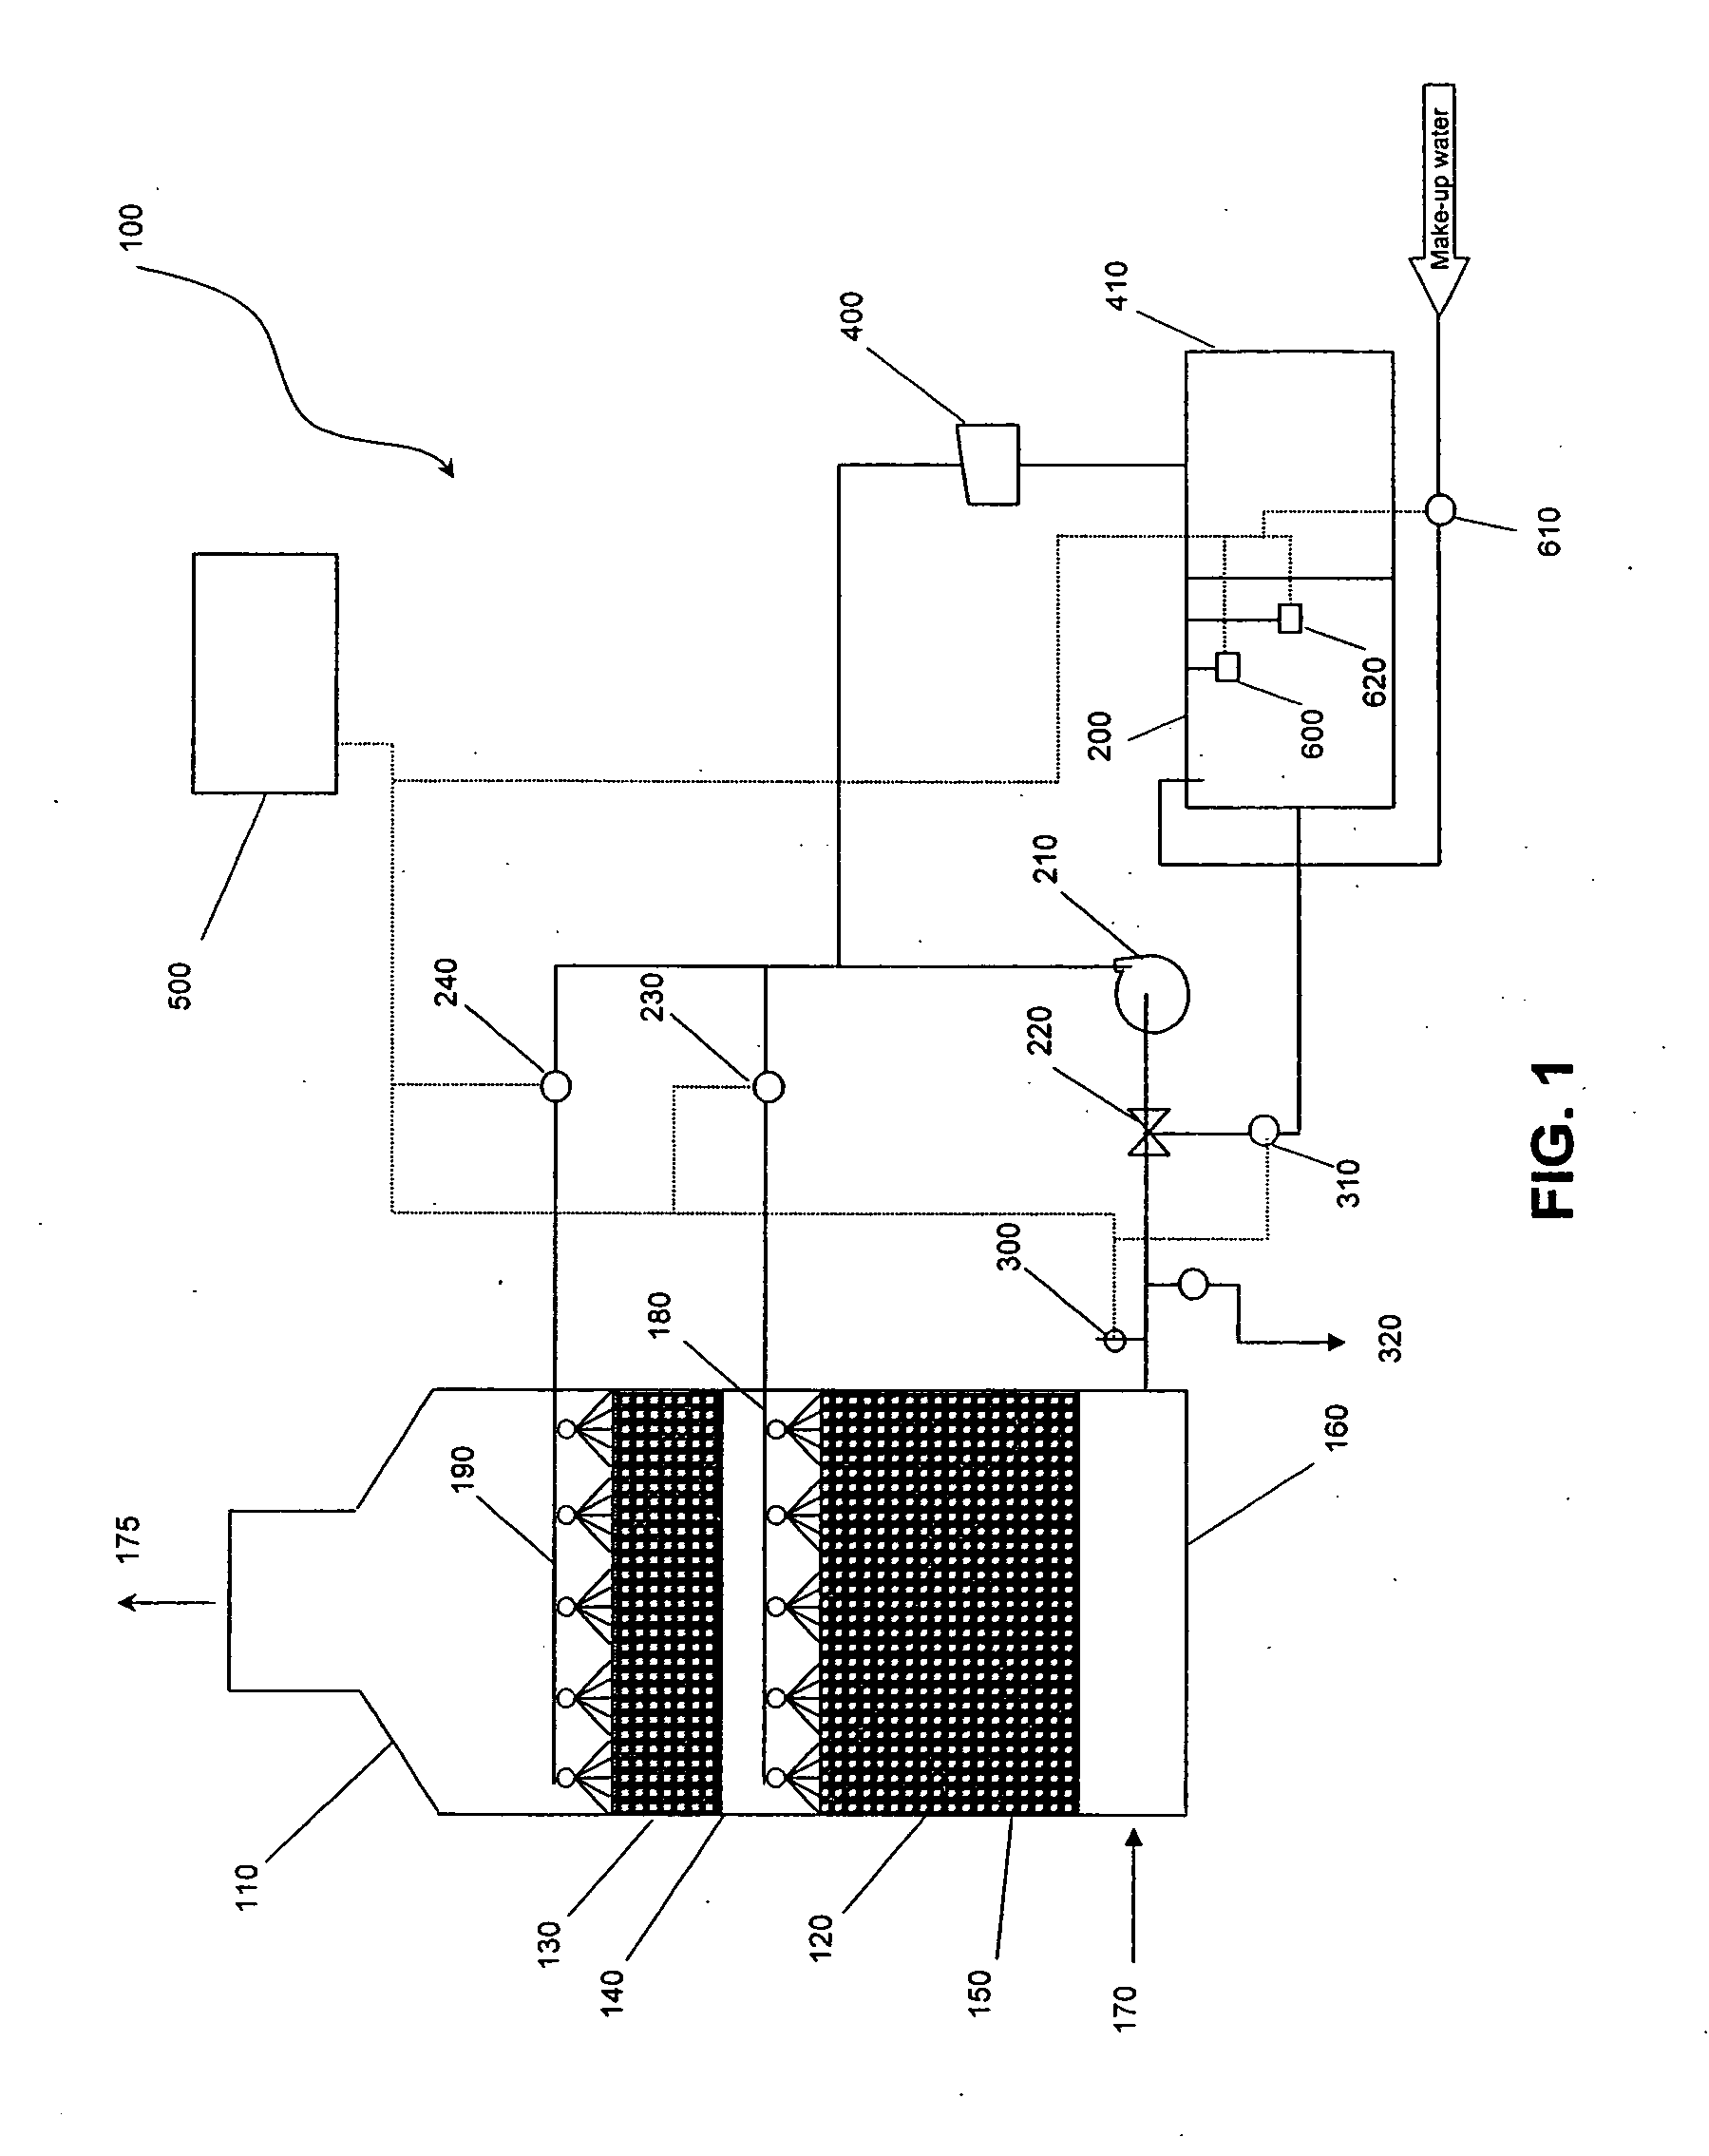 Biological scrubber odor control system and method